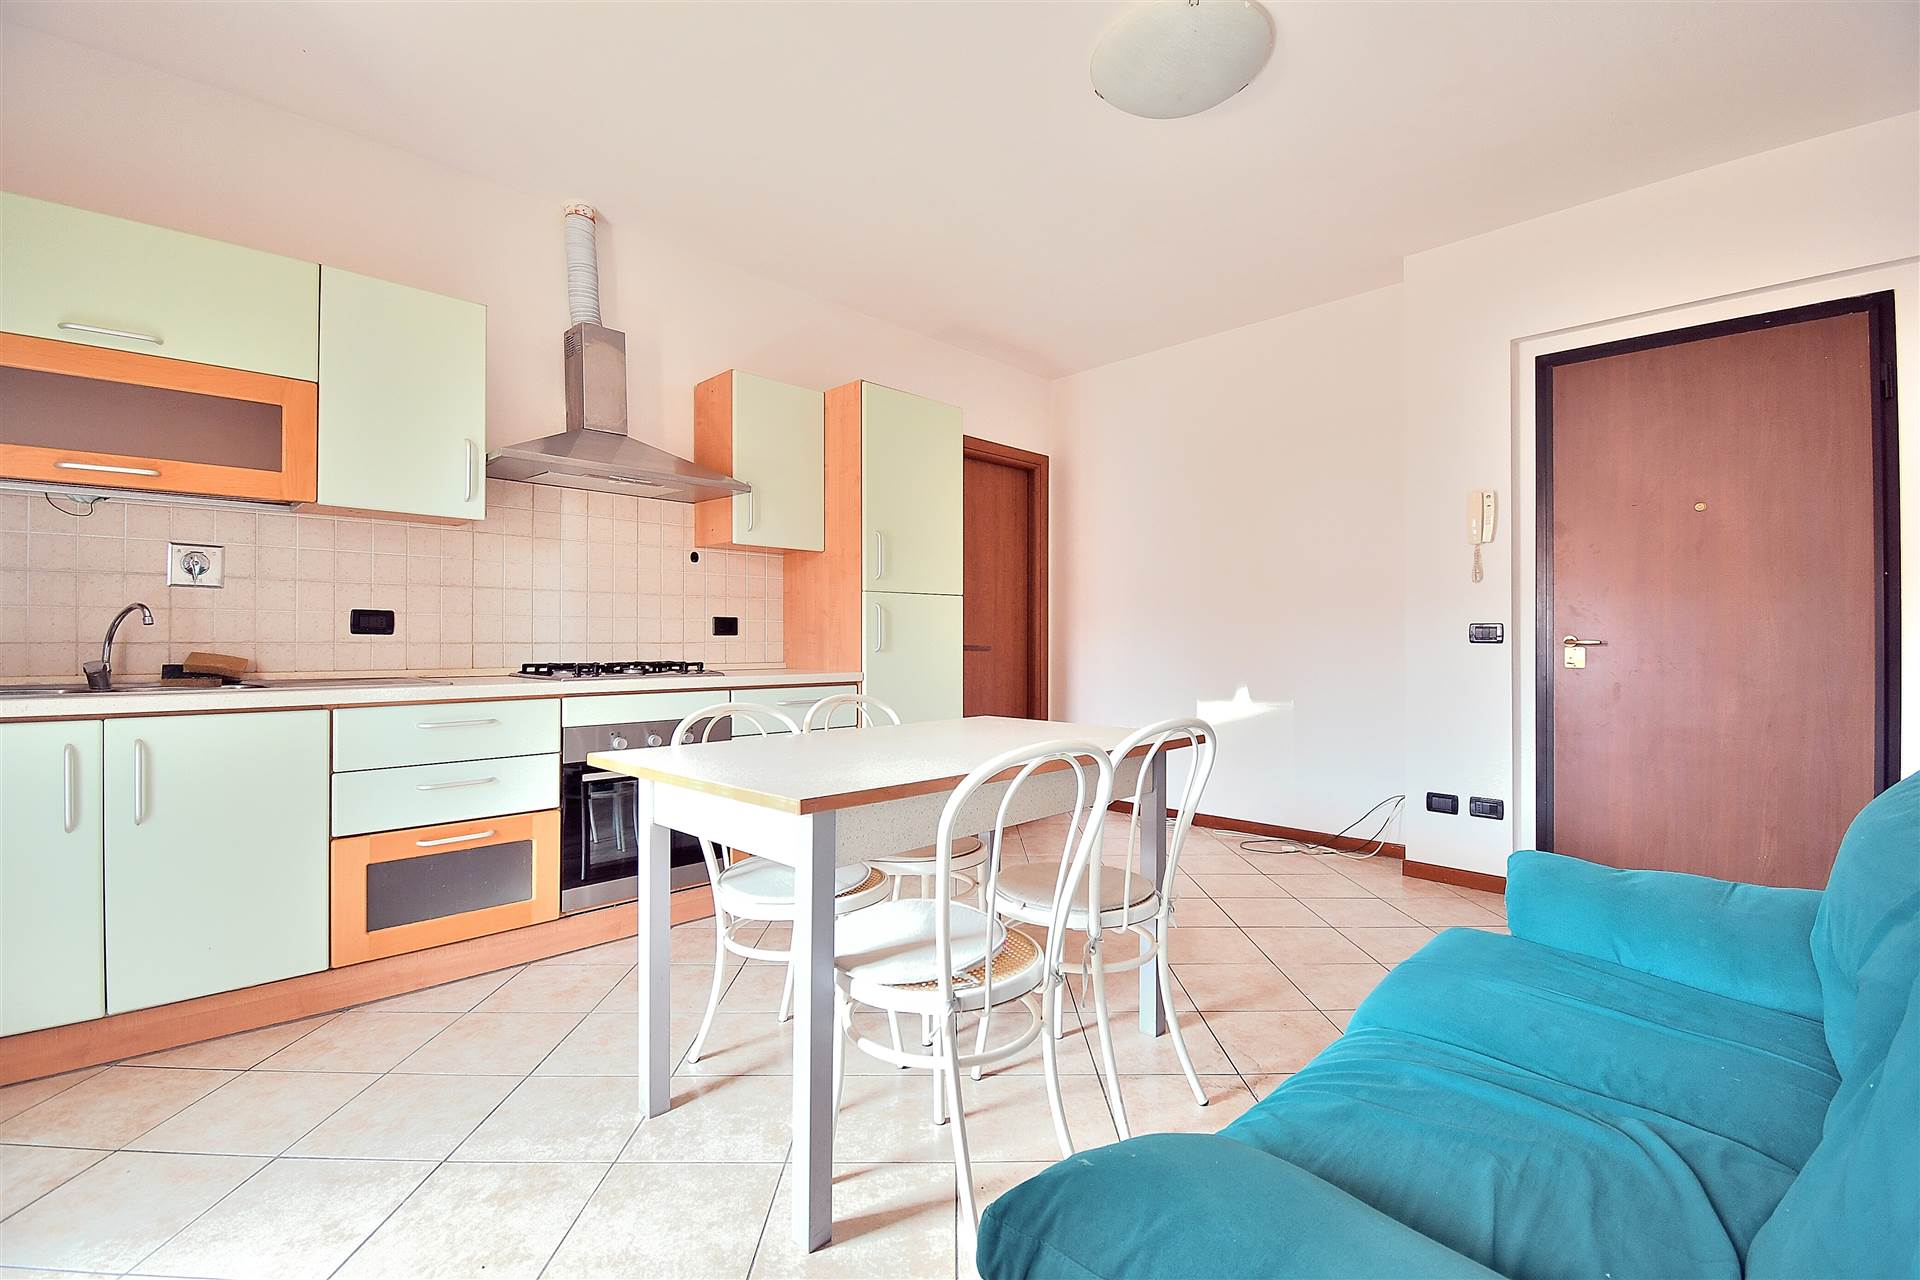 COLLE DI VAL D'ELSA, Apartment for sale of 70 Sq. mt., Excellent Condition, Heating Individual heating system, Energetic class: G, Epi: 175 kwh/m2 